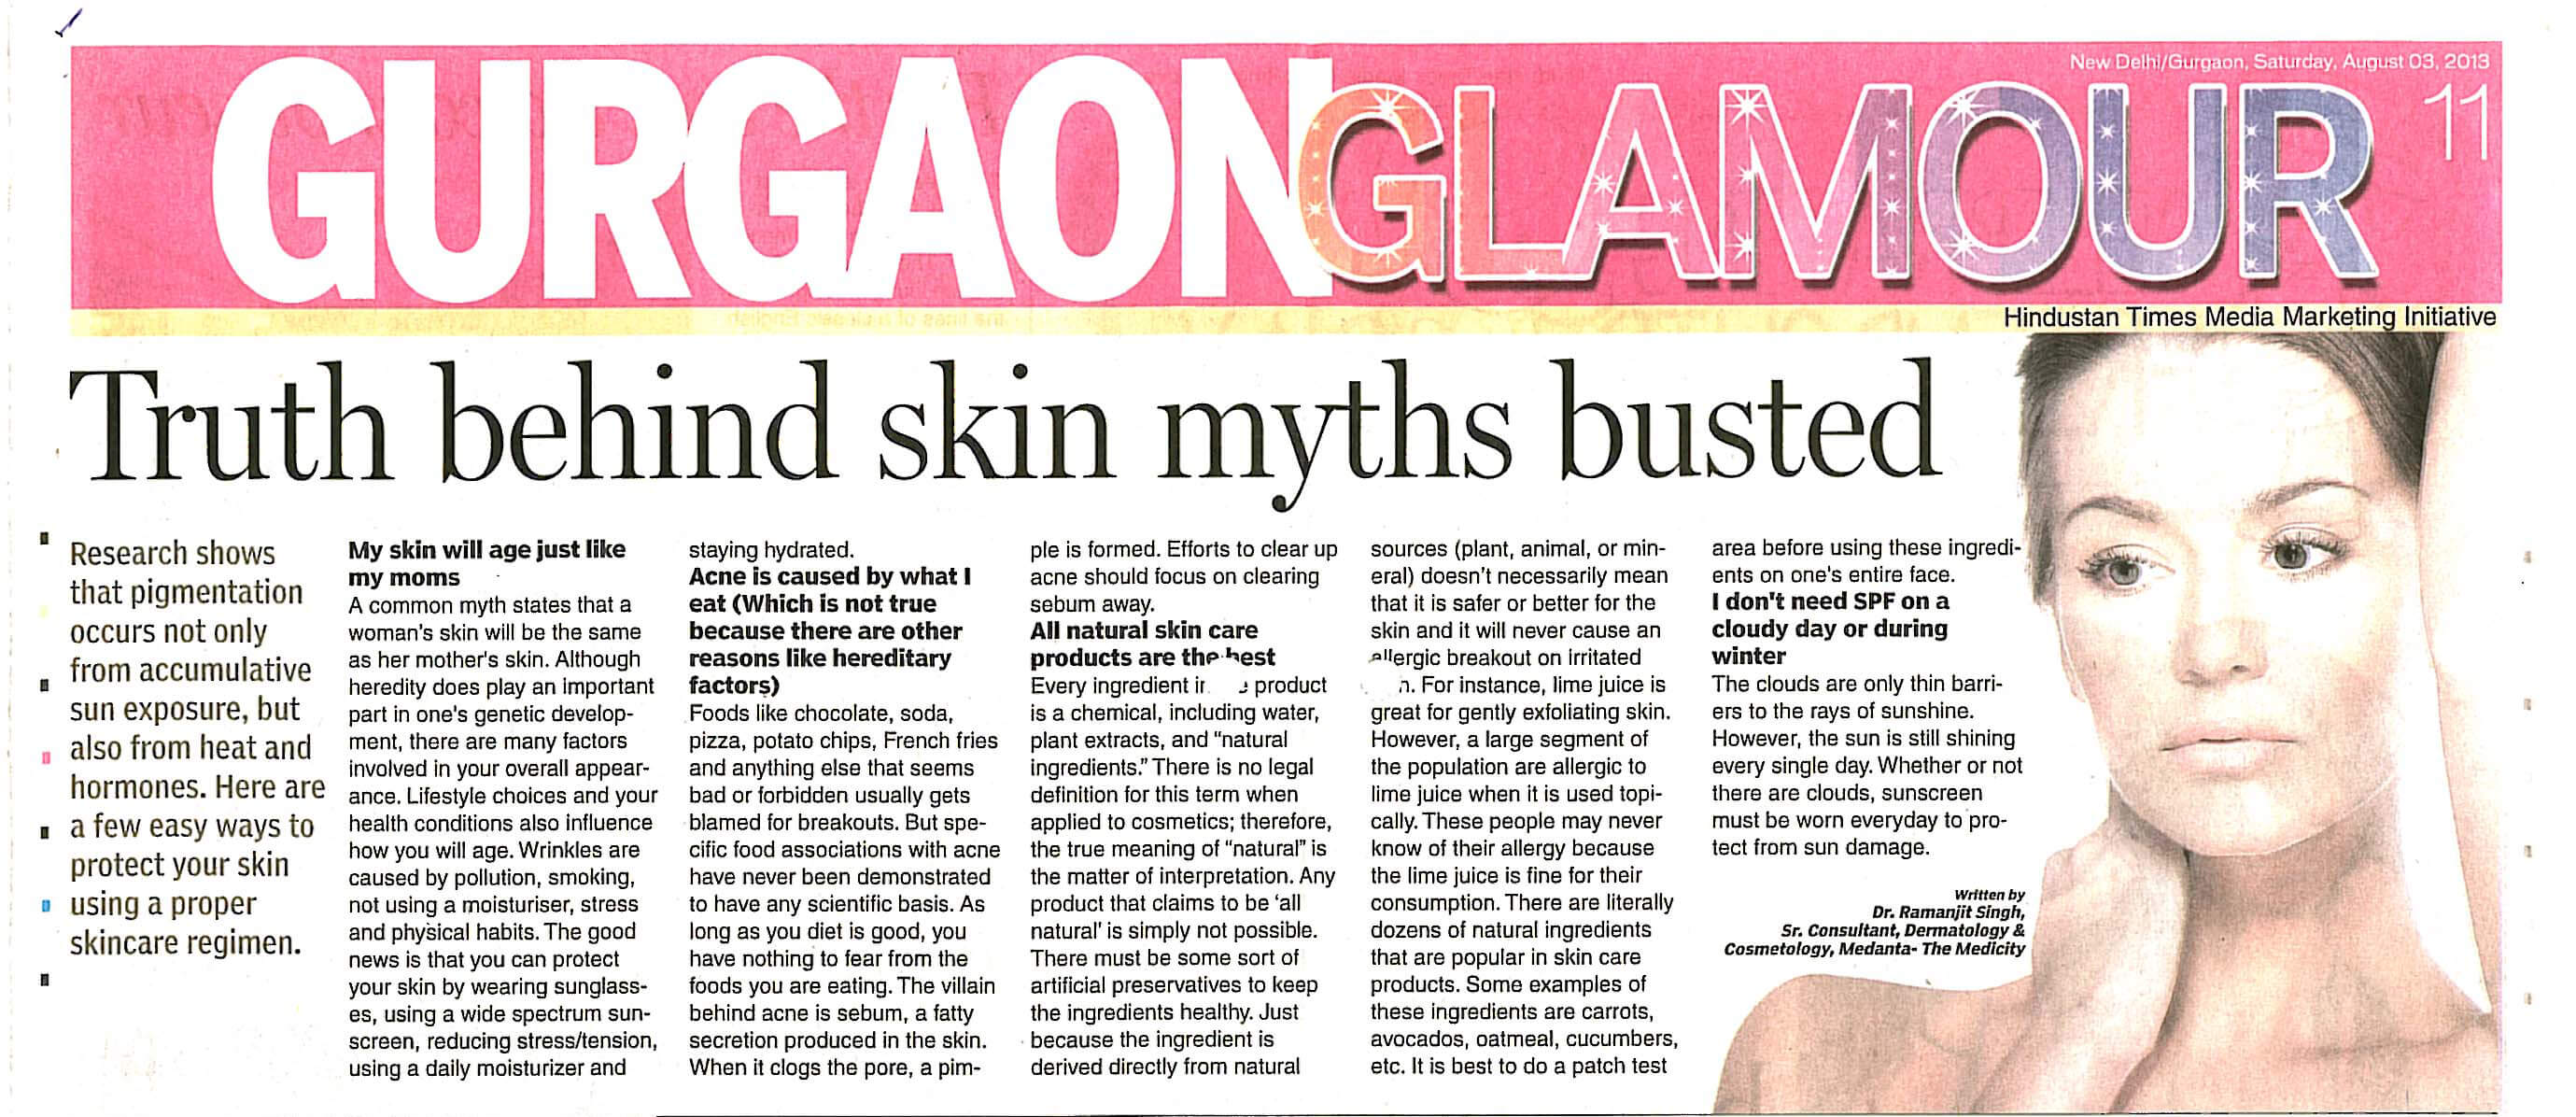 Truth behind skin myths busted